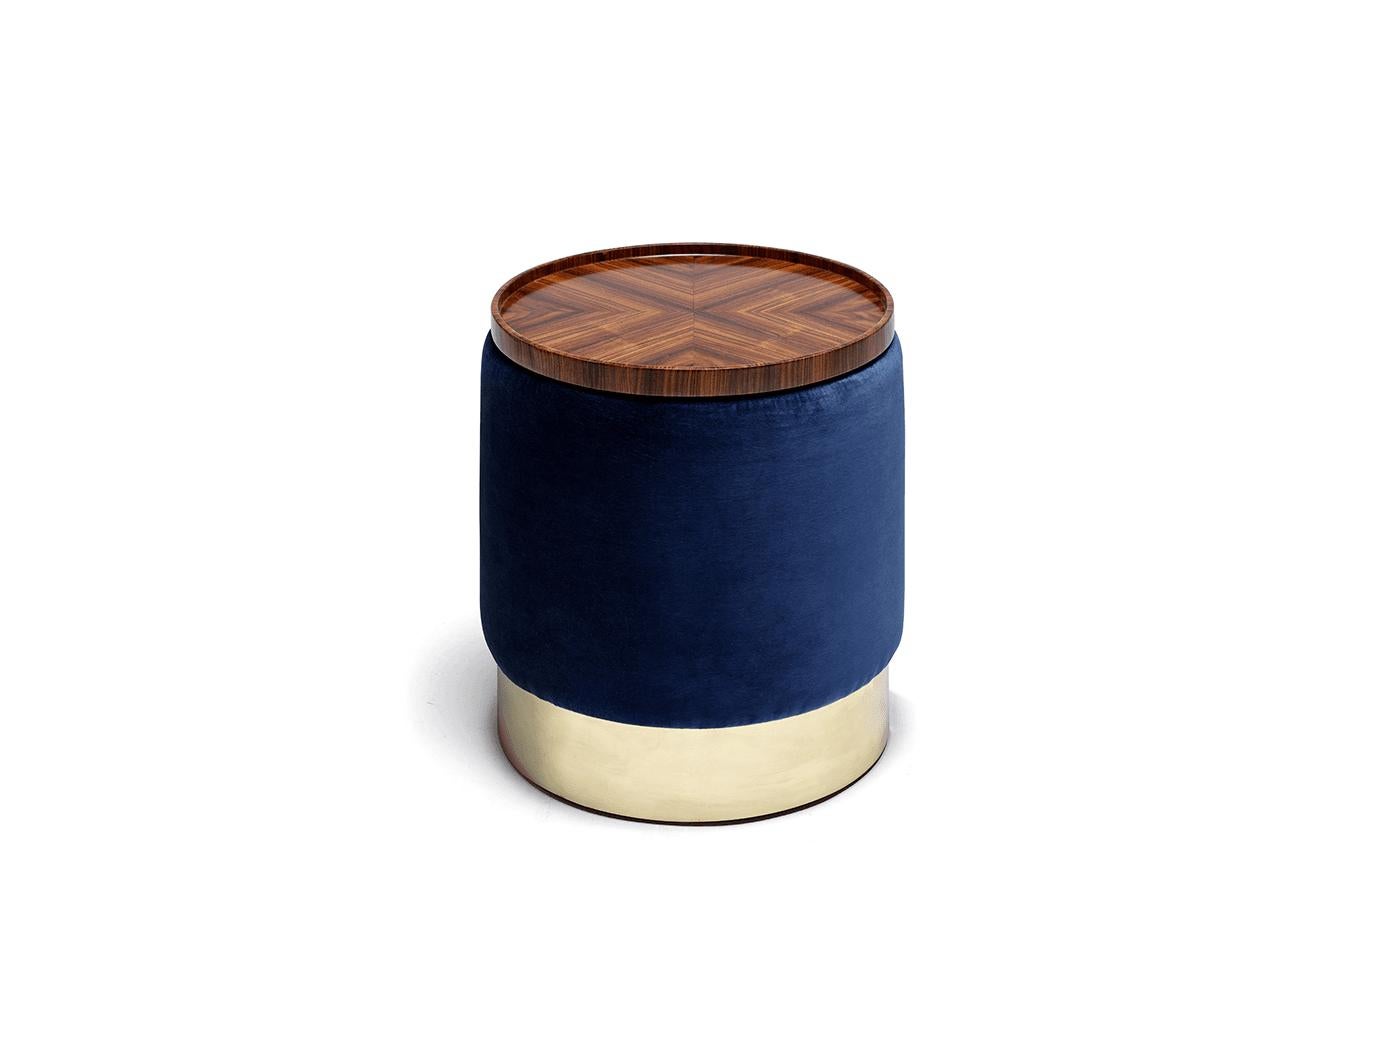 This pouf set is a very beautiful and versatile pieces, which can be used as a stool or, if you put the wood tray on it, as a small coffee table. It is made to order in a variety of velvet colors. The set includes a 2 poufs and one removable wood